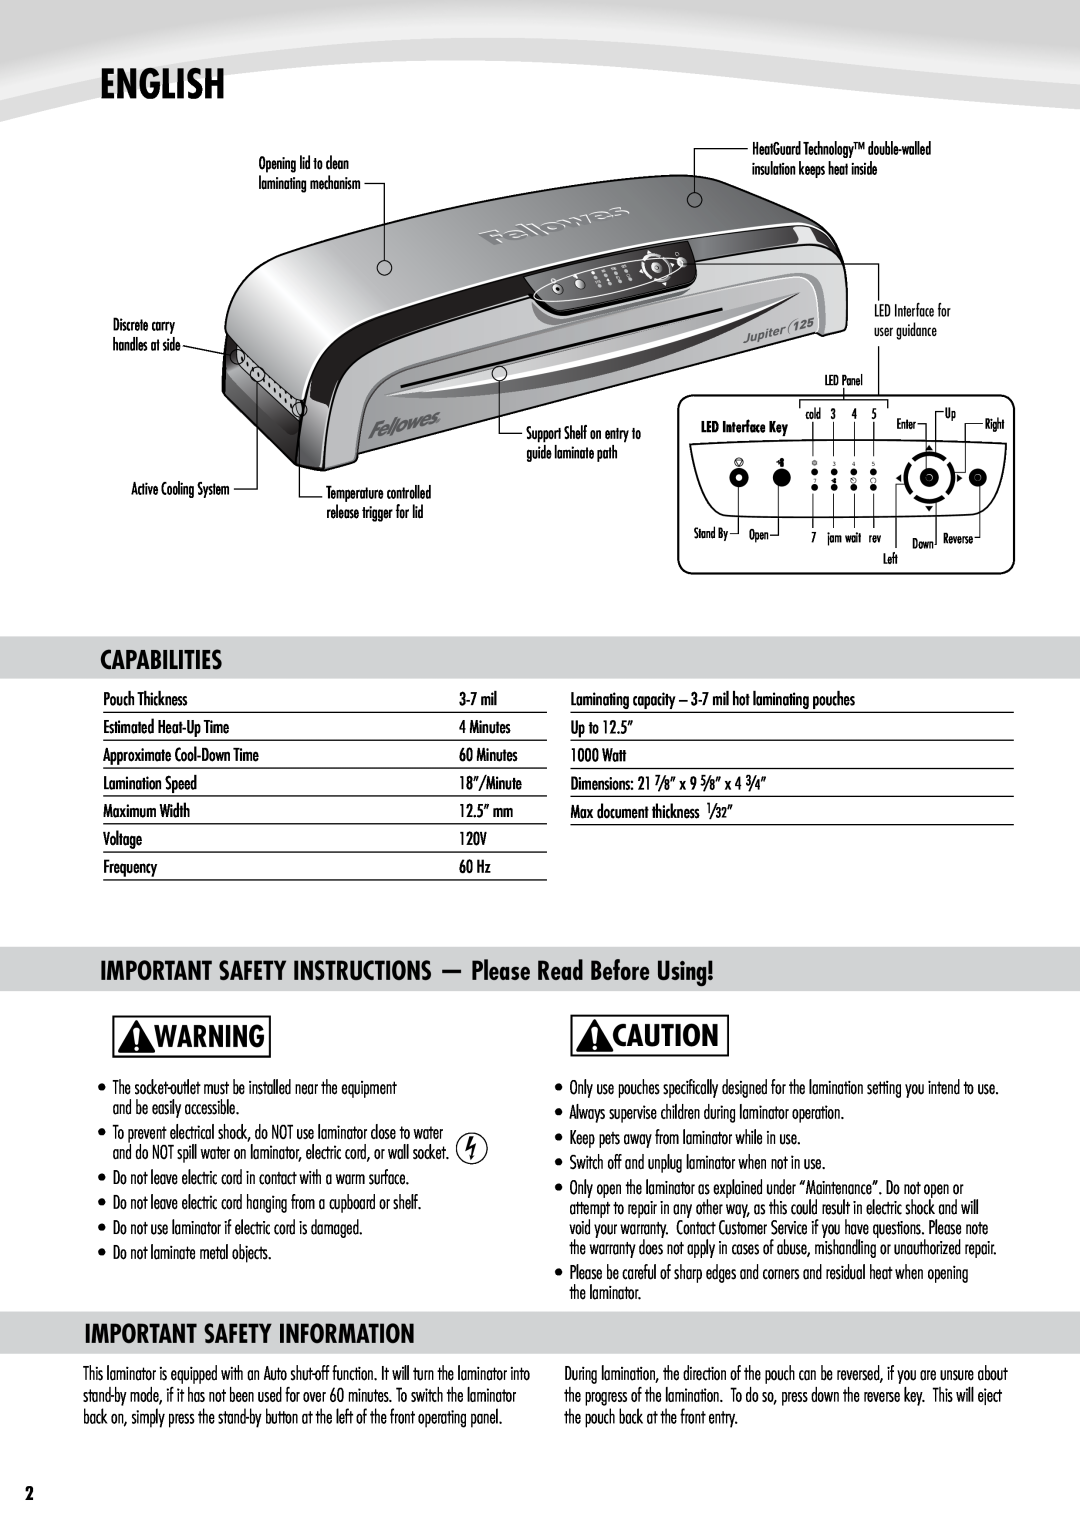 Fellowes 125 English, Capabilities, IMPORTANT SAFETY INSTRUCTIONS - Please Read Before Using, Important Safety Information 